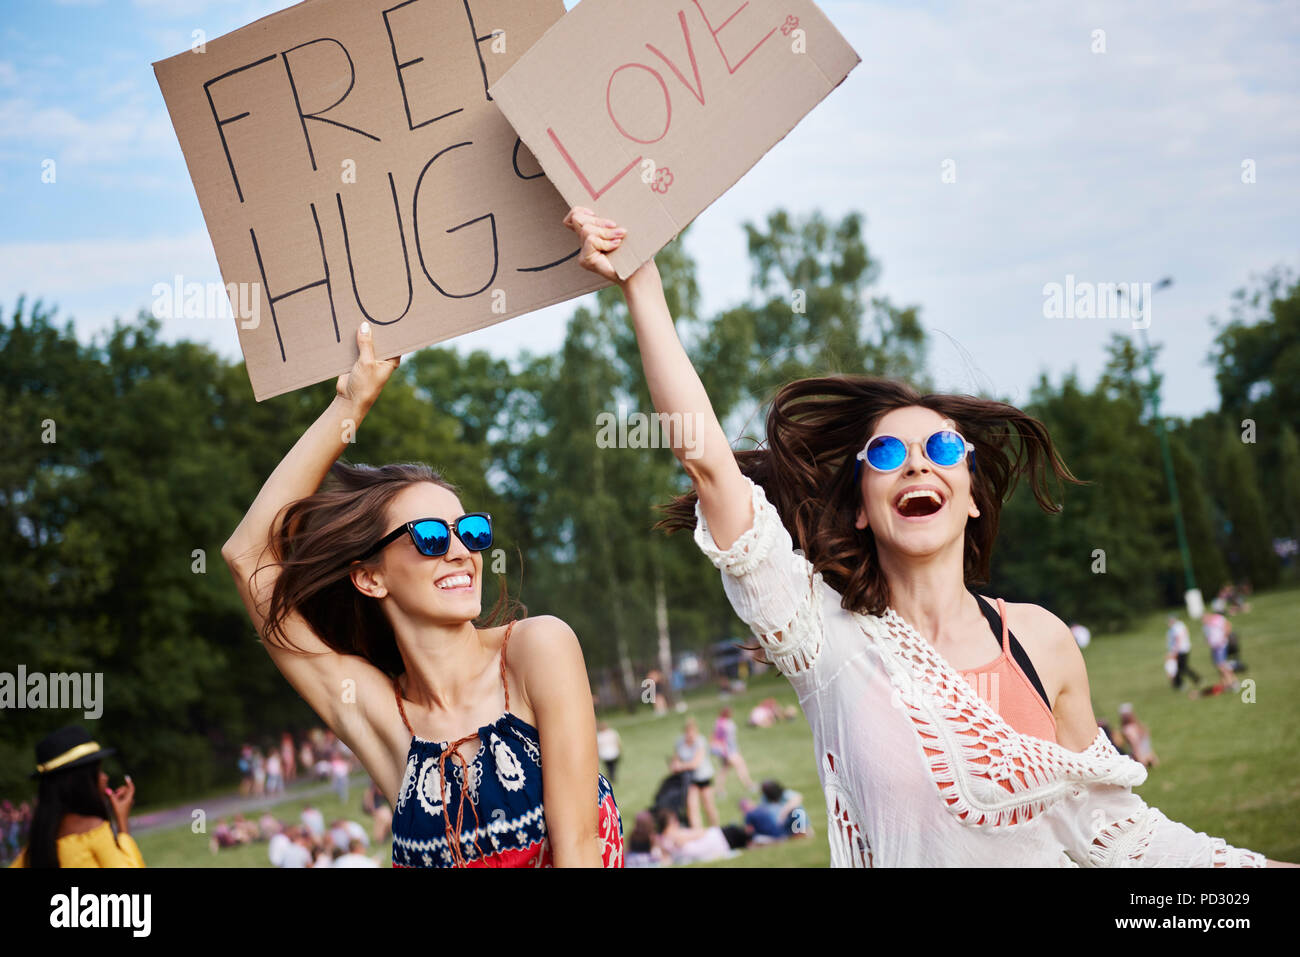 Friends holding up cardboard signs at music festival Stock Photo